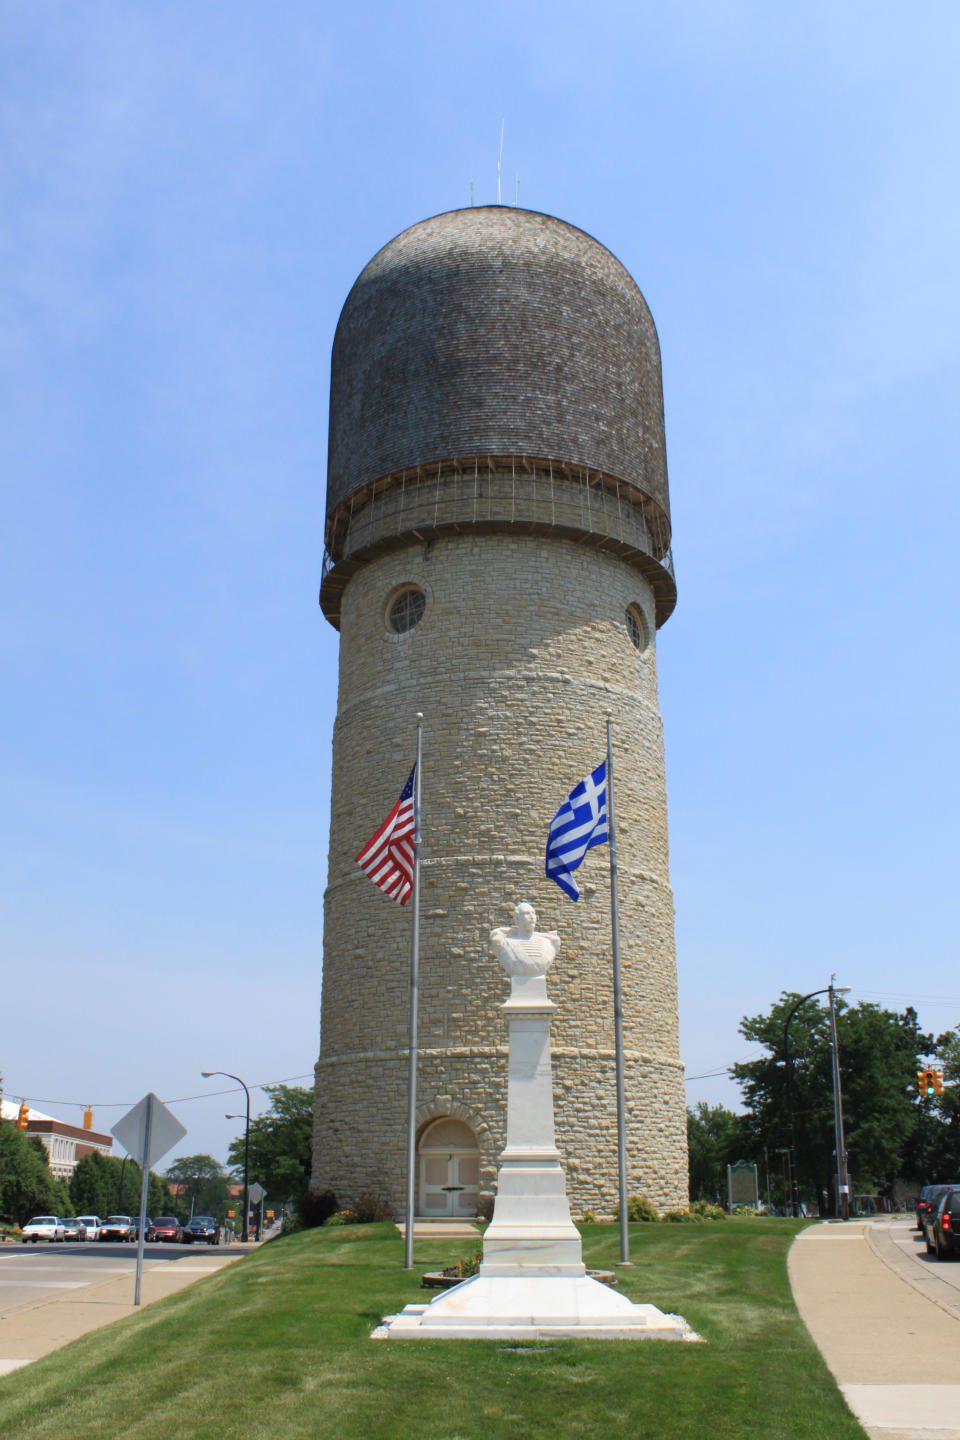 The Ypsilanti Water Tower was, ahem, <a href="https://www.emich.edu/walkingtour/watertower.htm" target="_blank">erected in 1889</a>, but its builders might not be too thrilled with its colorful nickname. Locals call it the "brick dick," according to Cabinet Magazine, which bestowed the edifice the title of "<a href="http://cabinetmagazine.org/events/phallic/winner.php" target="_blank">Most Phallic Building In The World</a>."